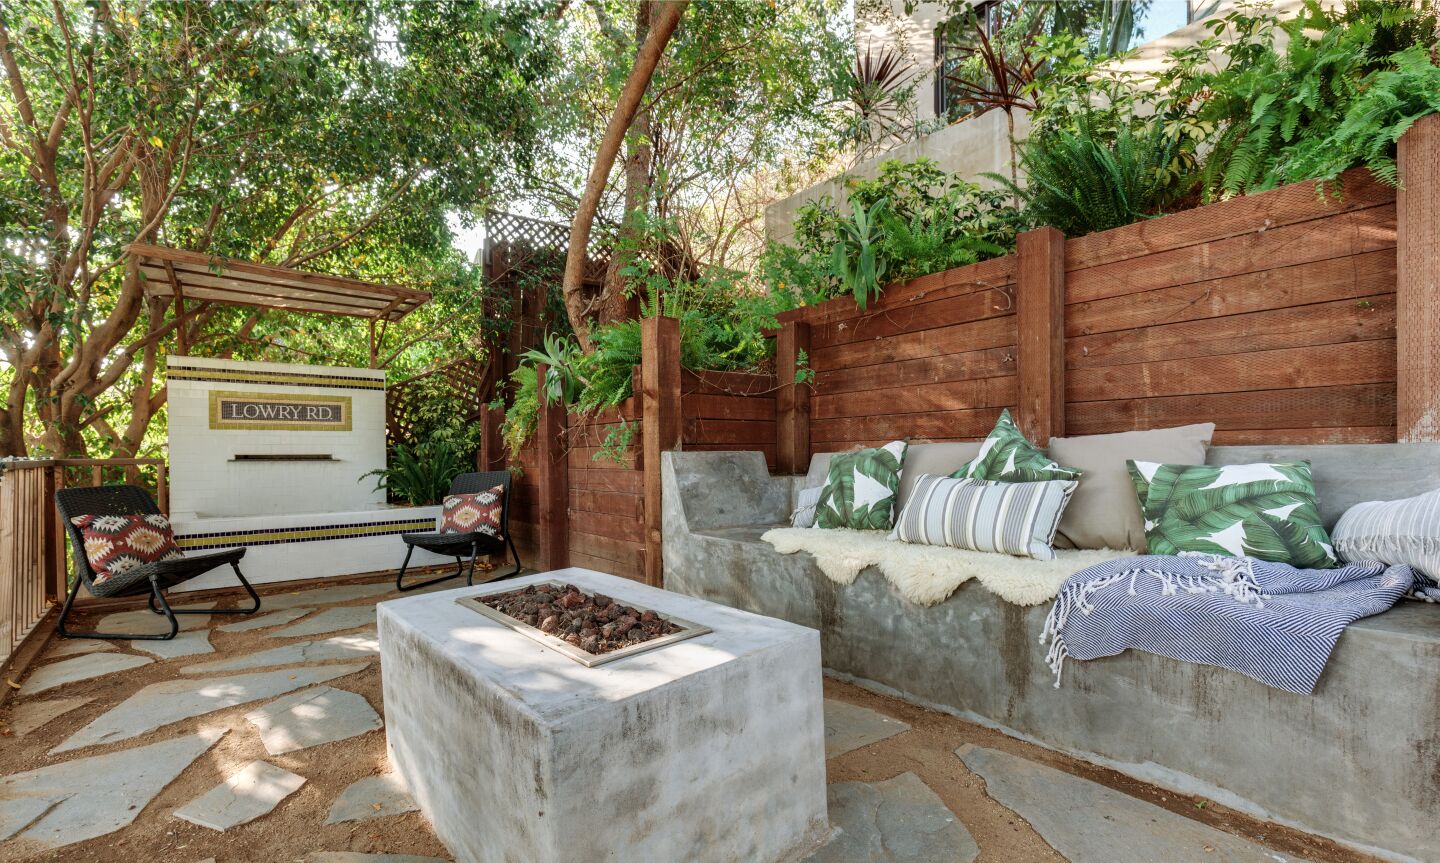 The fire pit with a sitting area nearby and greenery behind a retaining wall.